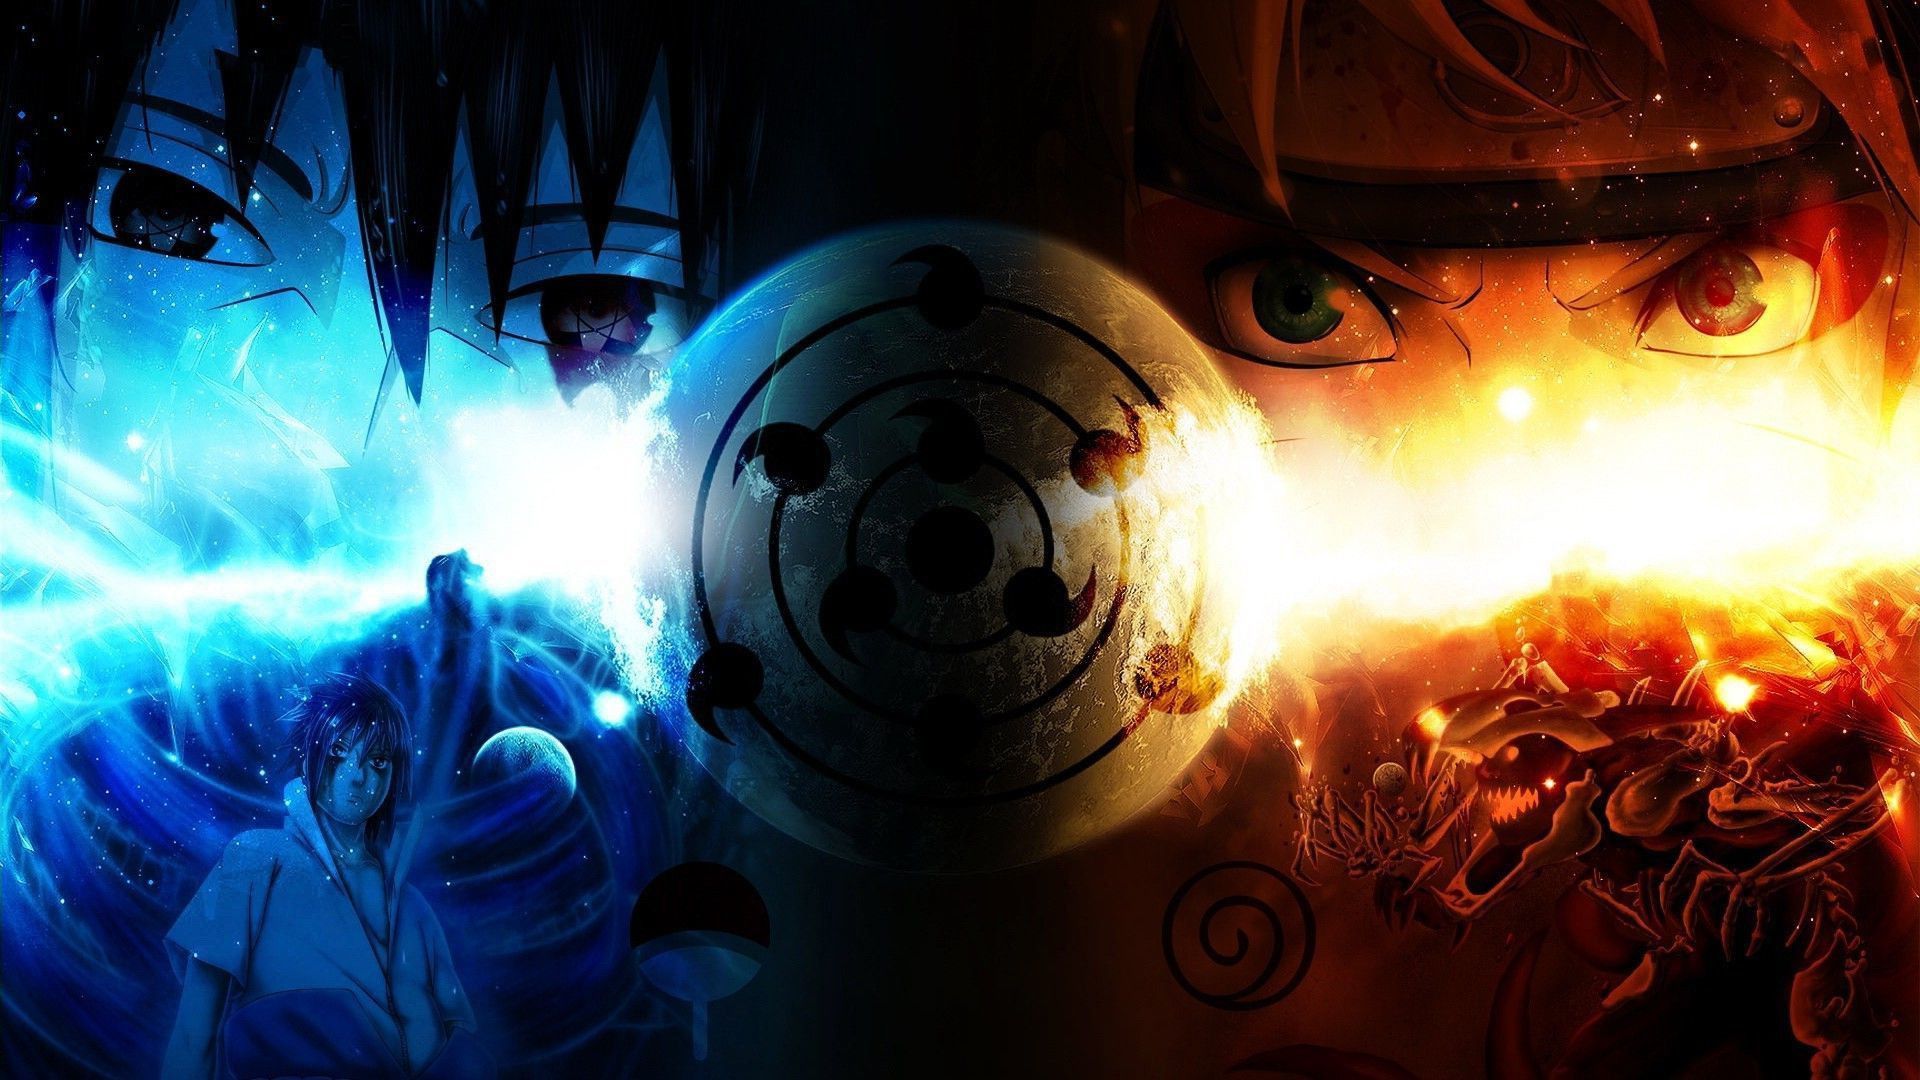 Free download Naruto Fire And Ice HD Anime Wallpaper Desktop Wallpaper 4k High [1920x1080] for your Desktop, Mobile & Tablet. Explore Wallpaper Desktop Mac. Wallpaper For Mac, Macbook Air